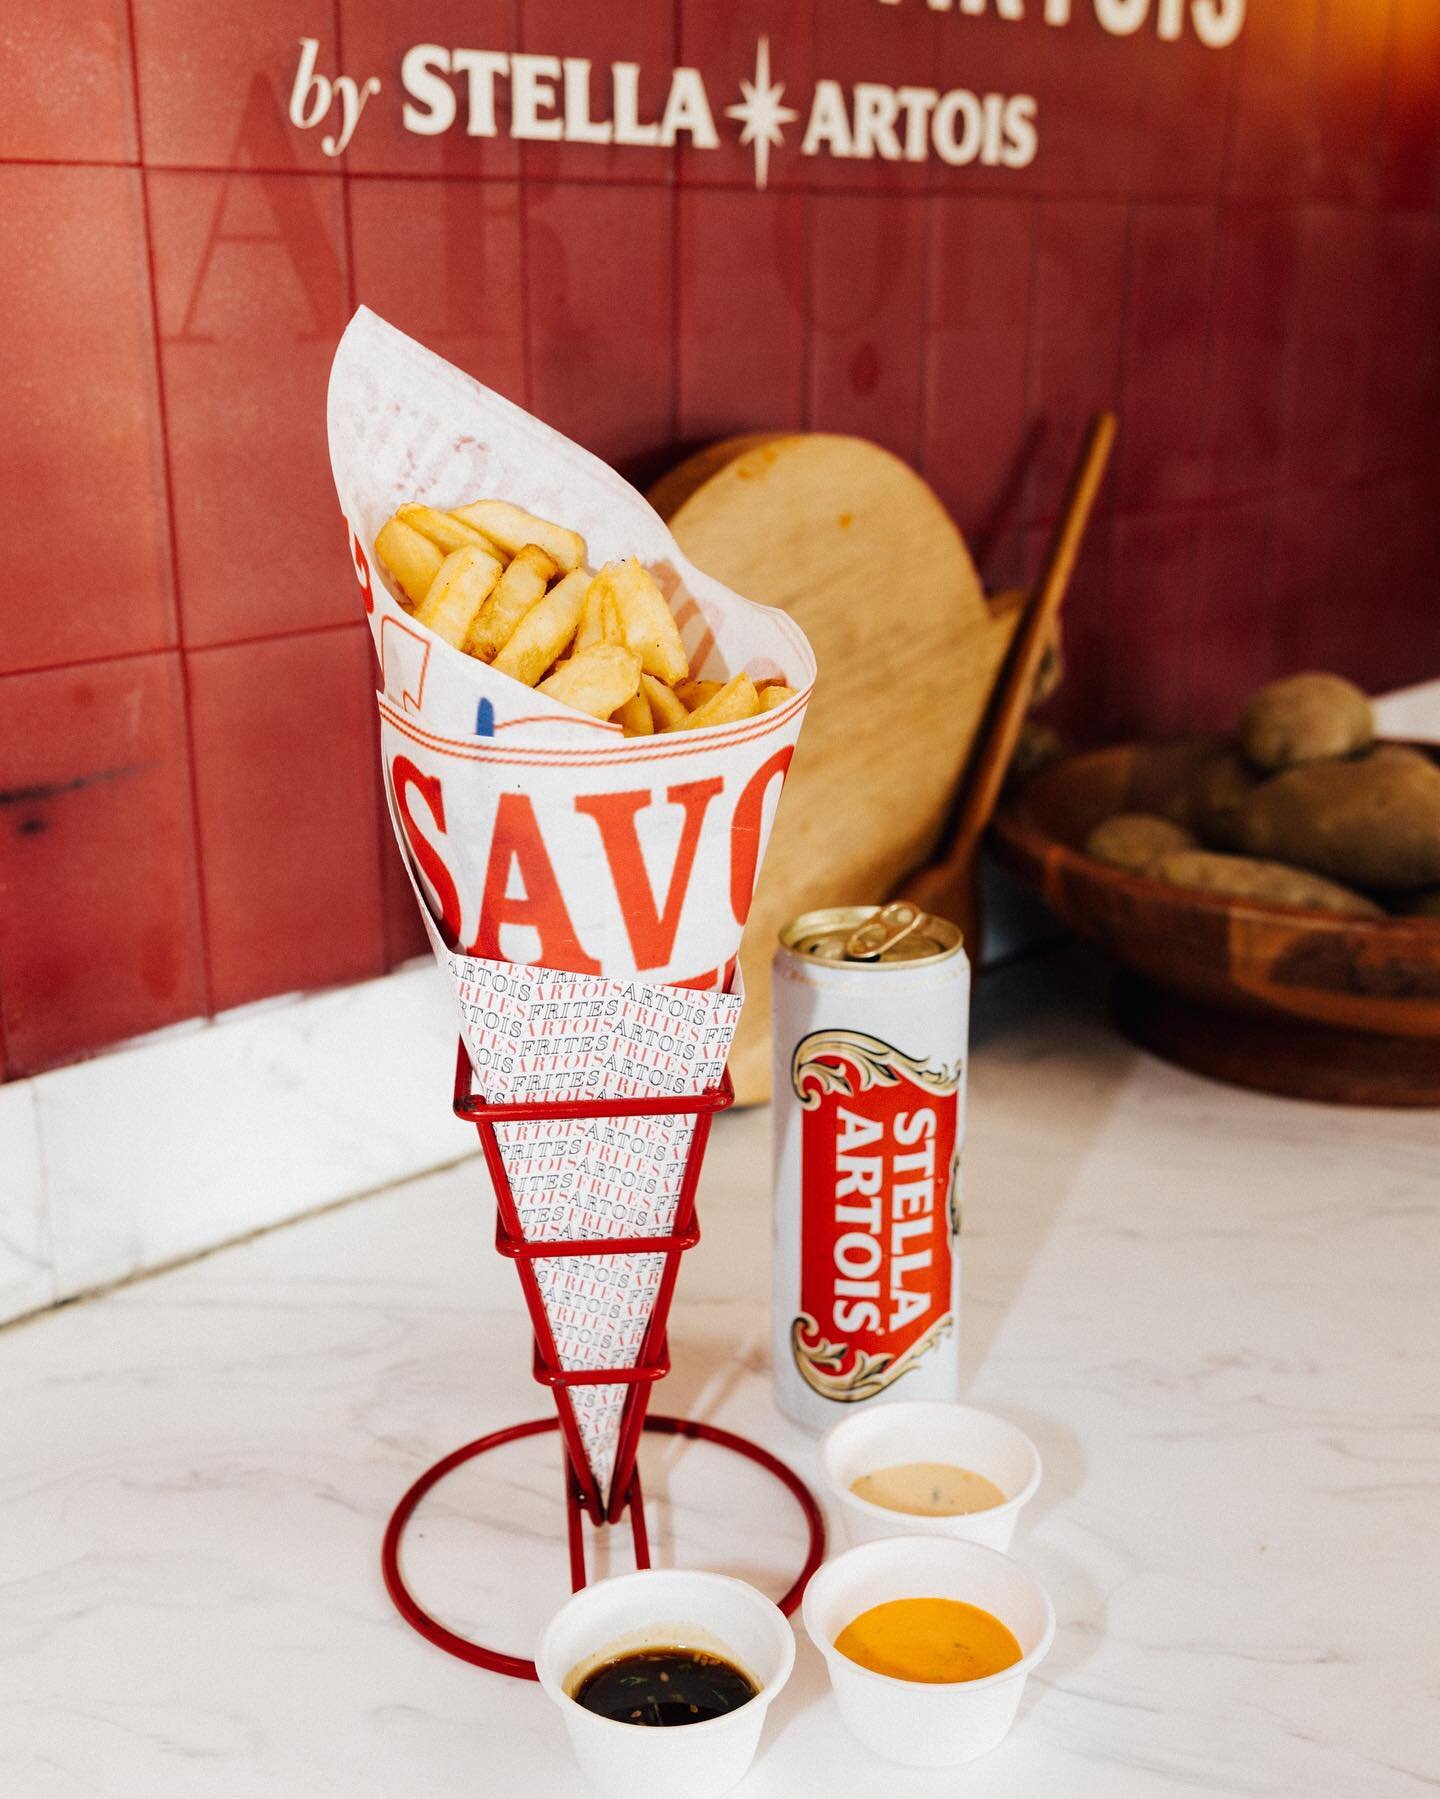 F1 weekend is heating up, so stay calm, cool and connected with us! Stop by the @stellaartoisusa pop-up and grab a crisp Stella with some Frites here at Sunset in the Sand ☀️ #FritesArtois